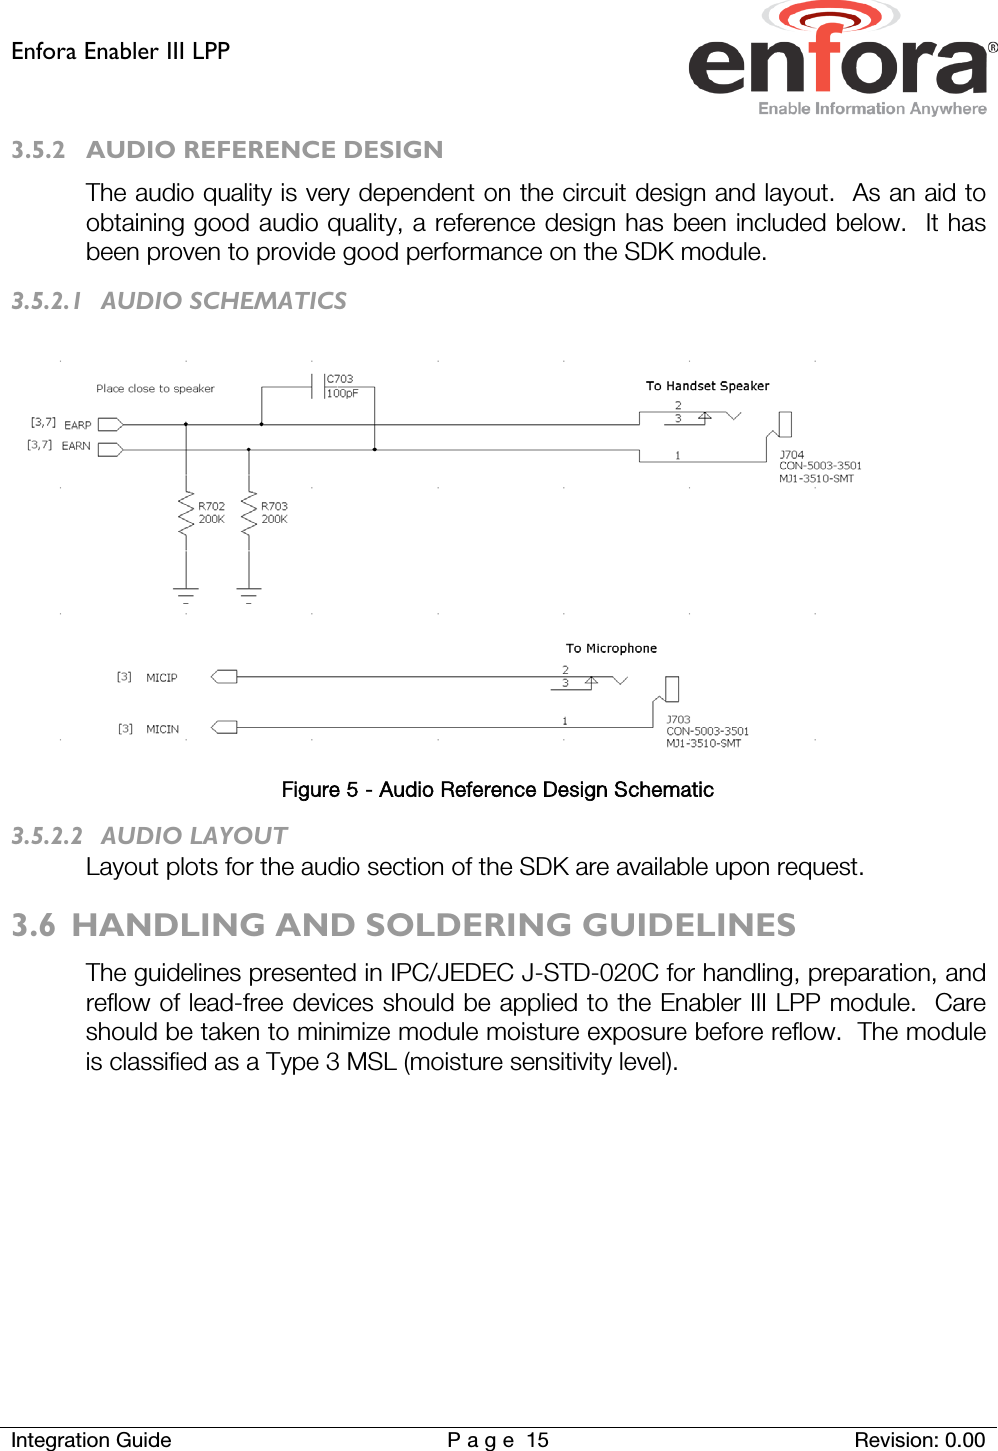 Enfora Enabler III LPP    Integration Guide Page 15 Revision: 0.00  3.5.2 AUDIO REFERENCE DESIGN The audio quality is very dependent on the circuit design and layout.  As an aid to obtaining good audio quality, a reference design has been included below.  It has been proven to provide good performance on the SDK module. 3.5.2.1 AUDIO SCHEMATICS   Figure 5 - Audio Reference Design Schematic 3.5.2.2 AUDIO LAYOUT Layout plots for the audio section of the SDK are available upon request. 3.6 HANDLING AND SOLDERING GUIDELINES The guidelines presented in IPC/JEDEC J-STD-020C for handling, preparation, and reflow of lead-free devices should be applied to the Enabler III LPP module.  Care should be taken to minimize module moisture exposure before reflow.  The module is classified as a Type 3 MSL (moisture sensitivity level).    